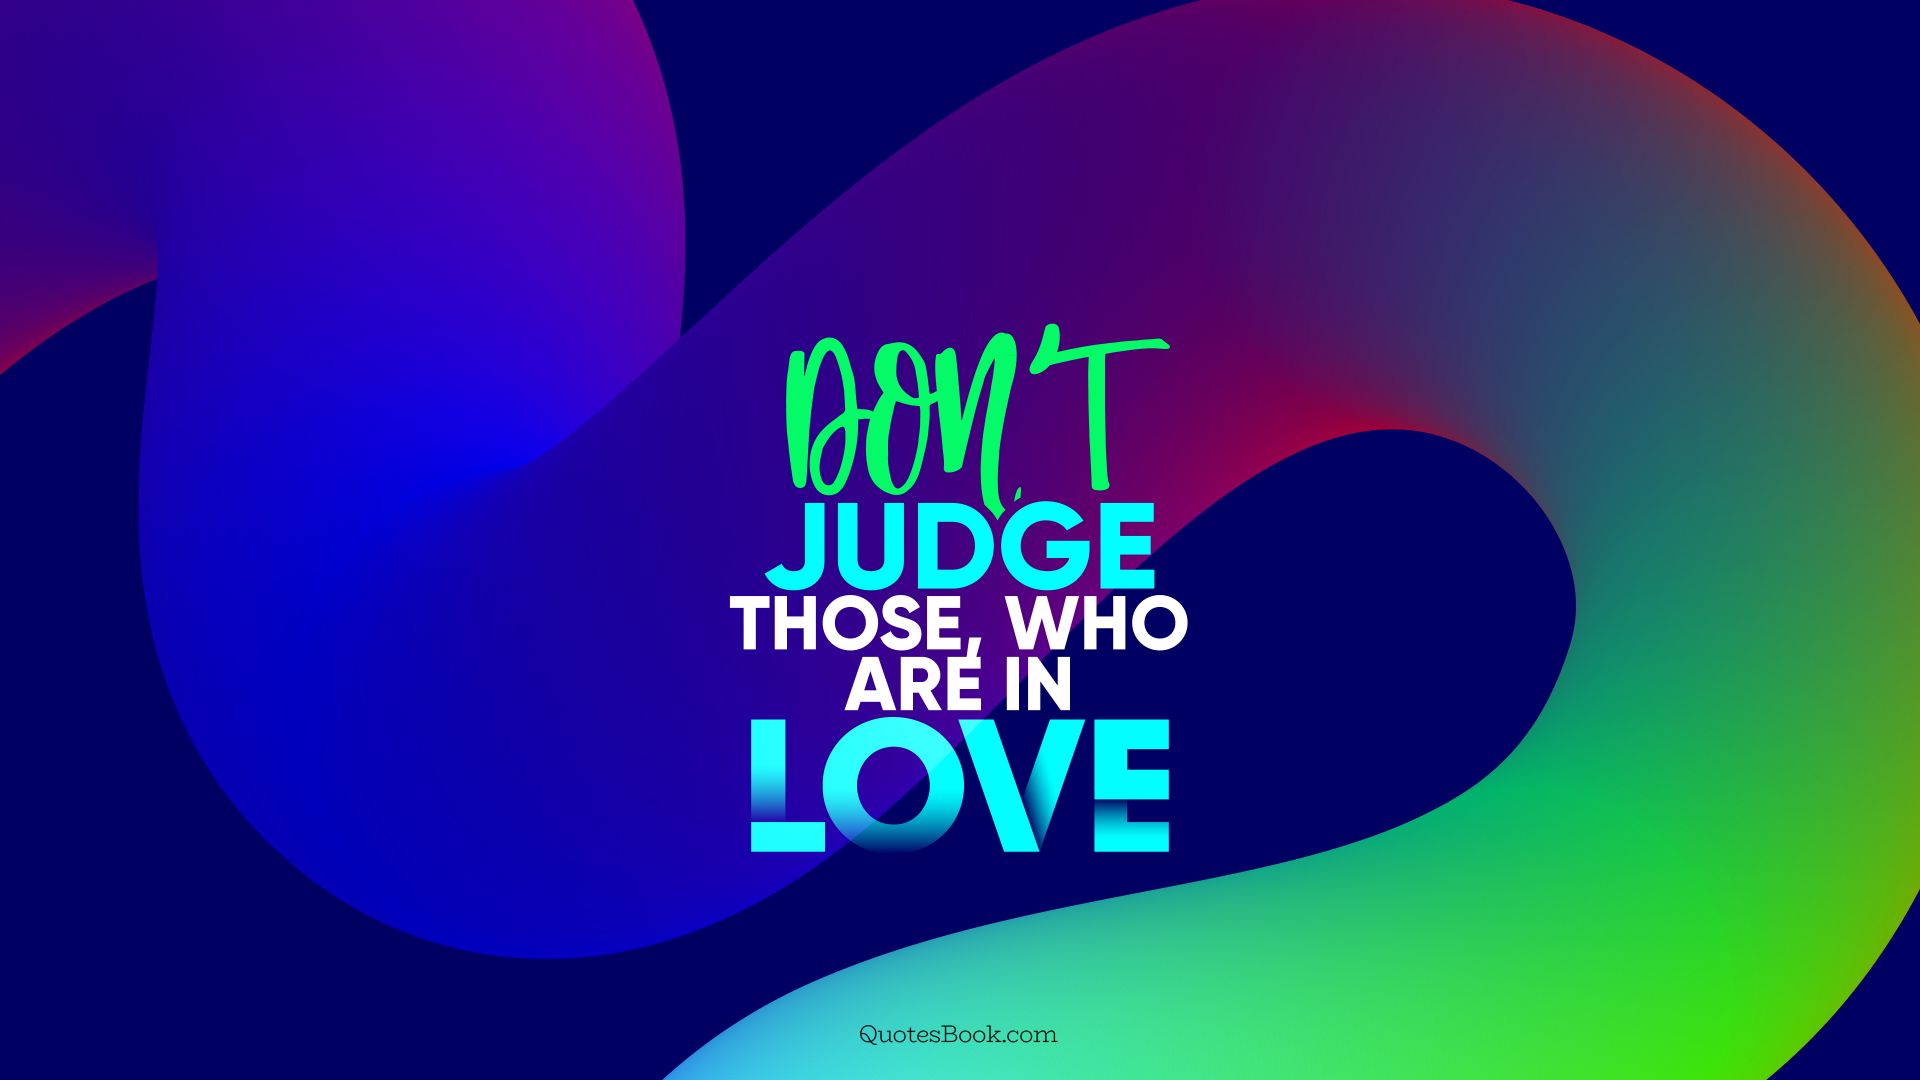 Don't judge those, who are in love. - Quote by QuotesBook